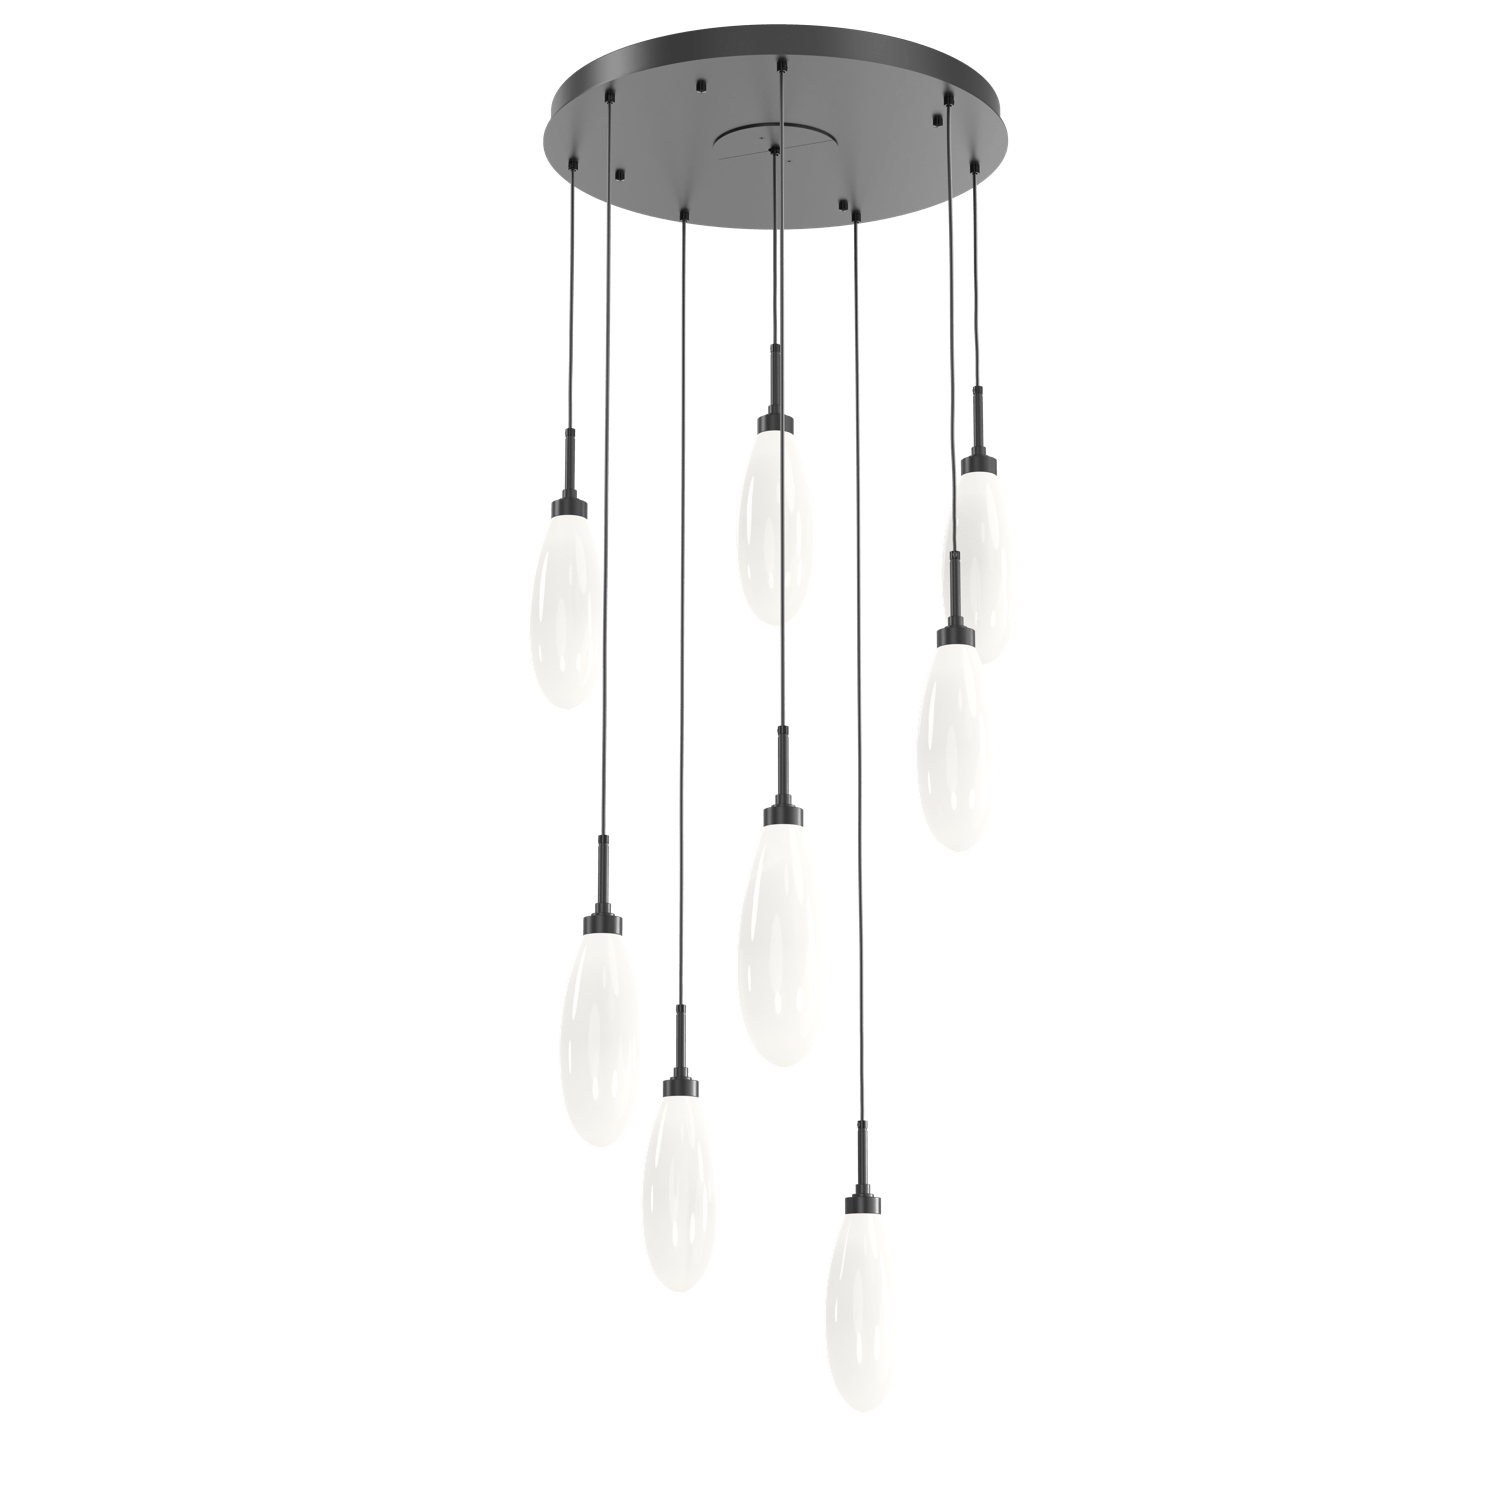 CHB0071-08-MB-WL-LL-Hammerton-Studio-Fiori-8-light-round-pendant-chandelier-with-matte-black-finish-and-opal-white-glass-shades-and-LED-lamping